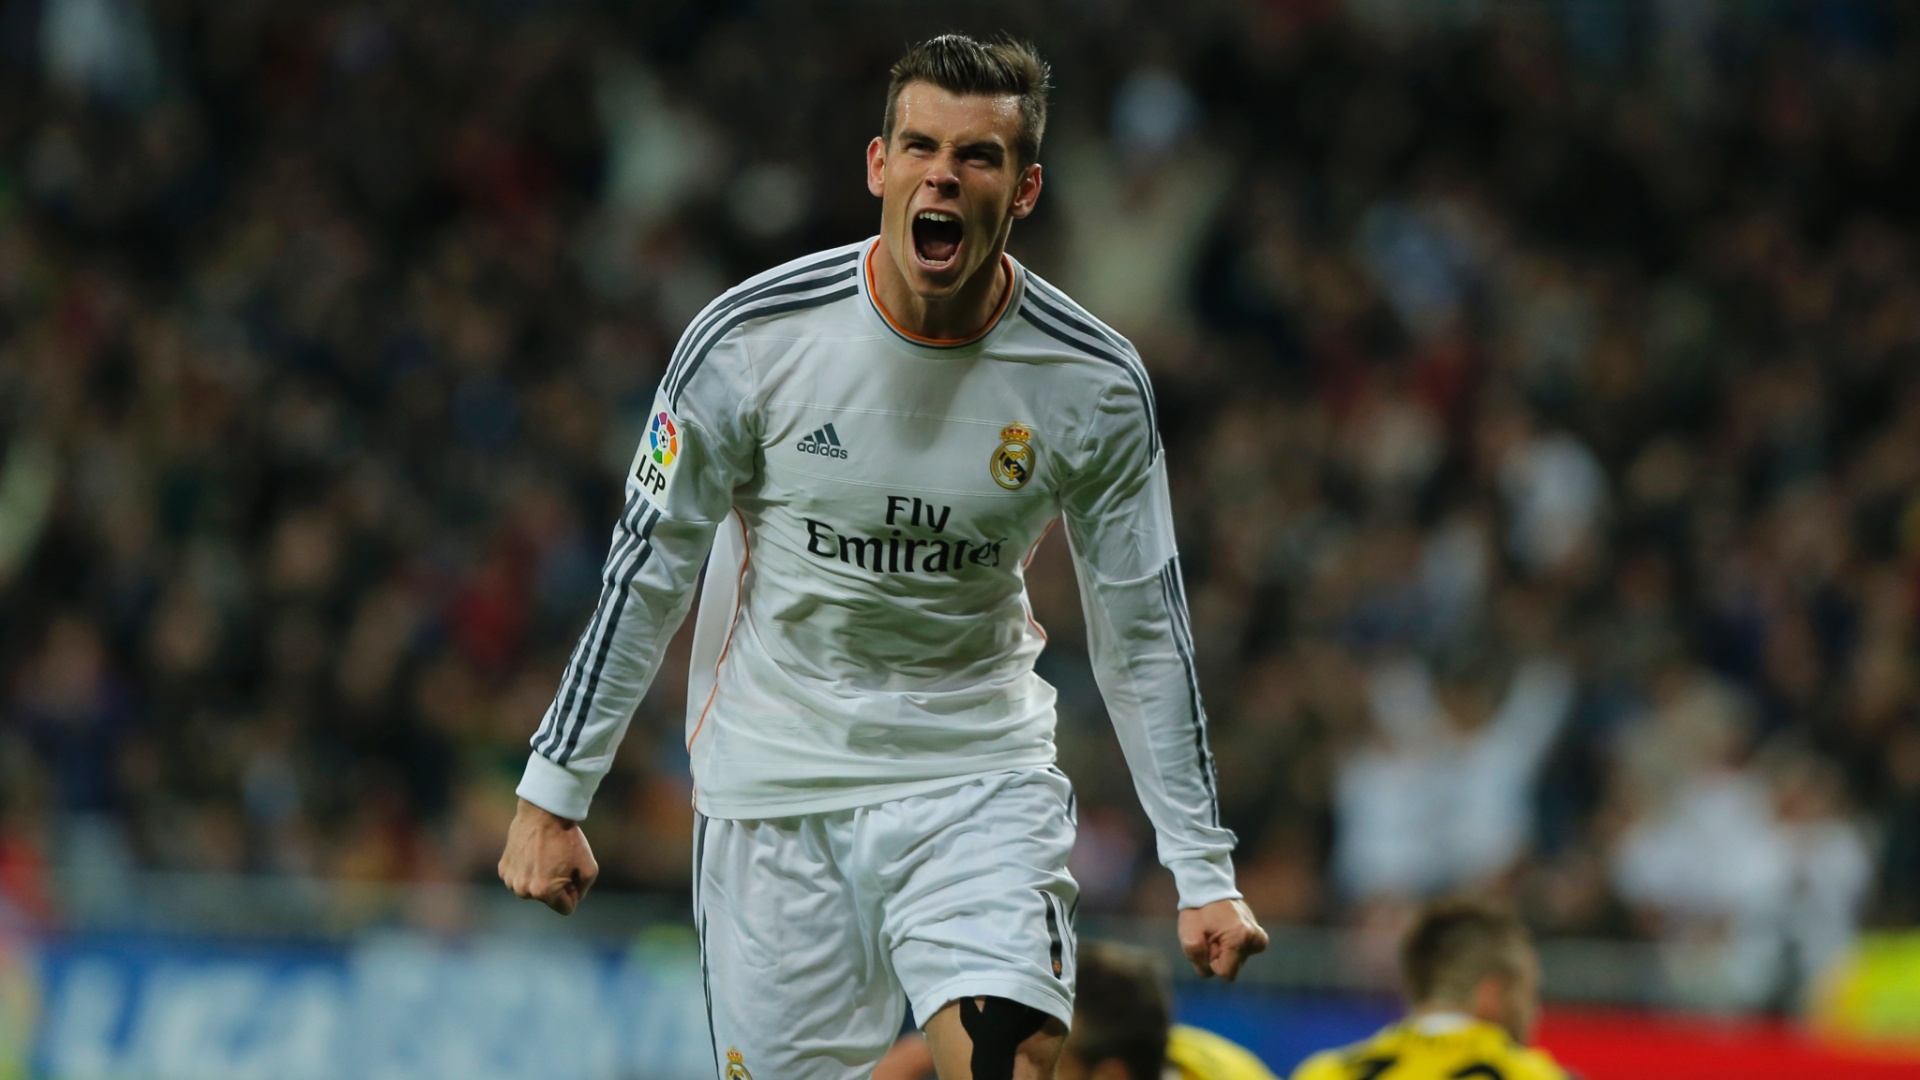 Gareth Bale Celebration For Real Madrid Photo And Picture Sharing